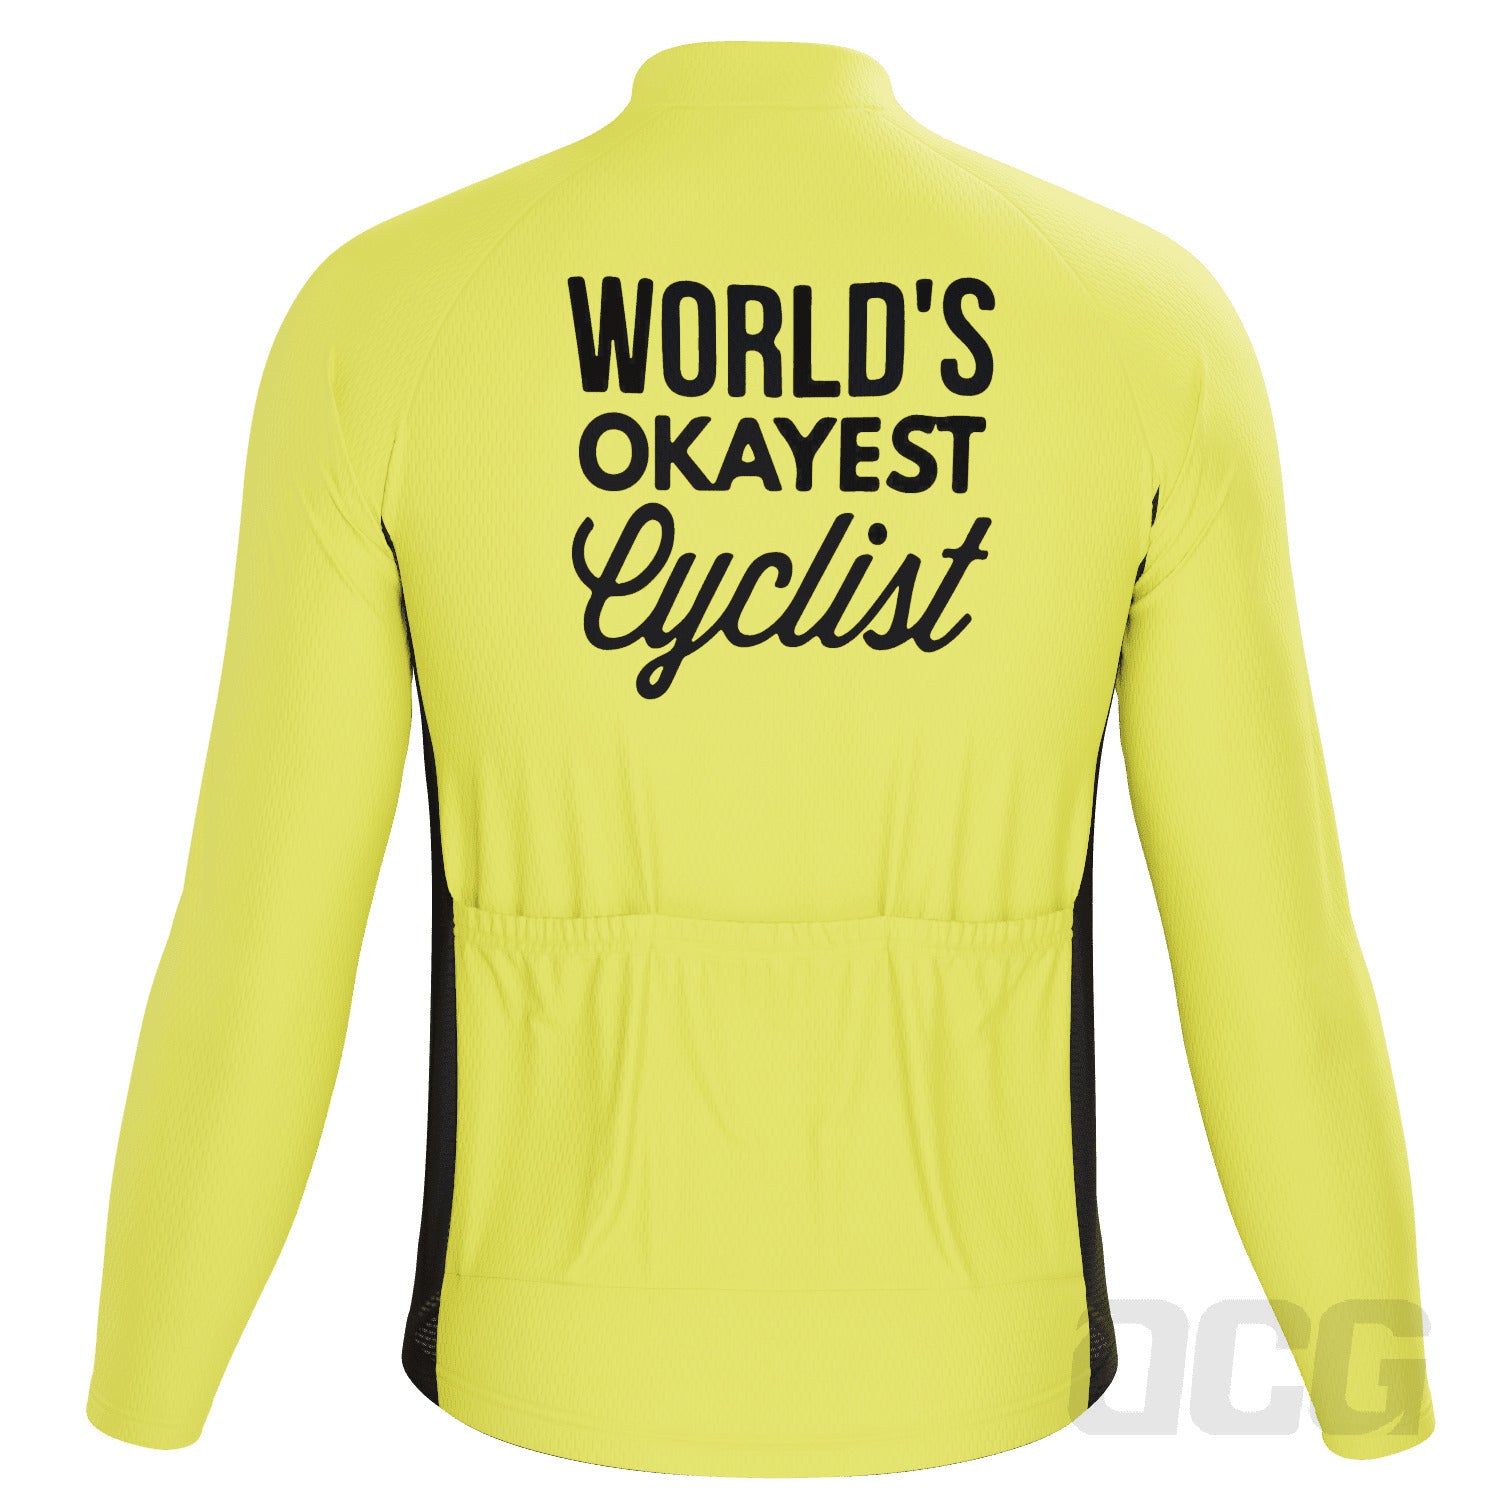 Men's Worlds Okayest Cyclist Long Sleeve Cycling Jersey